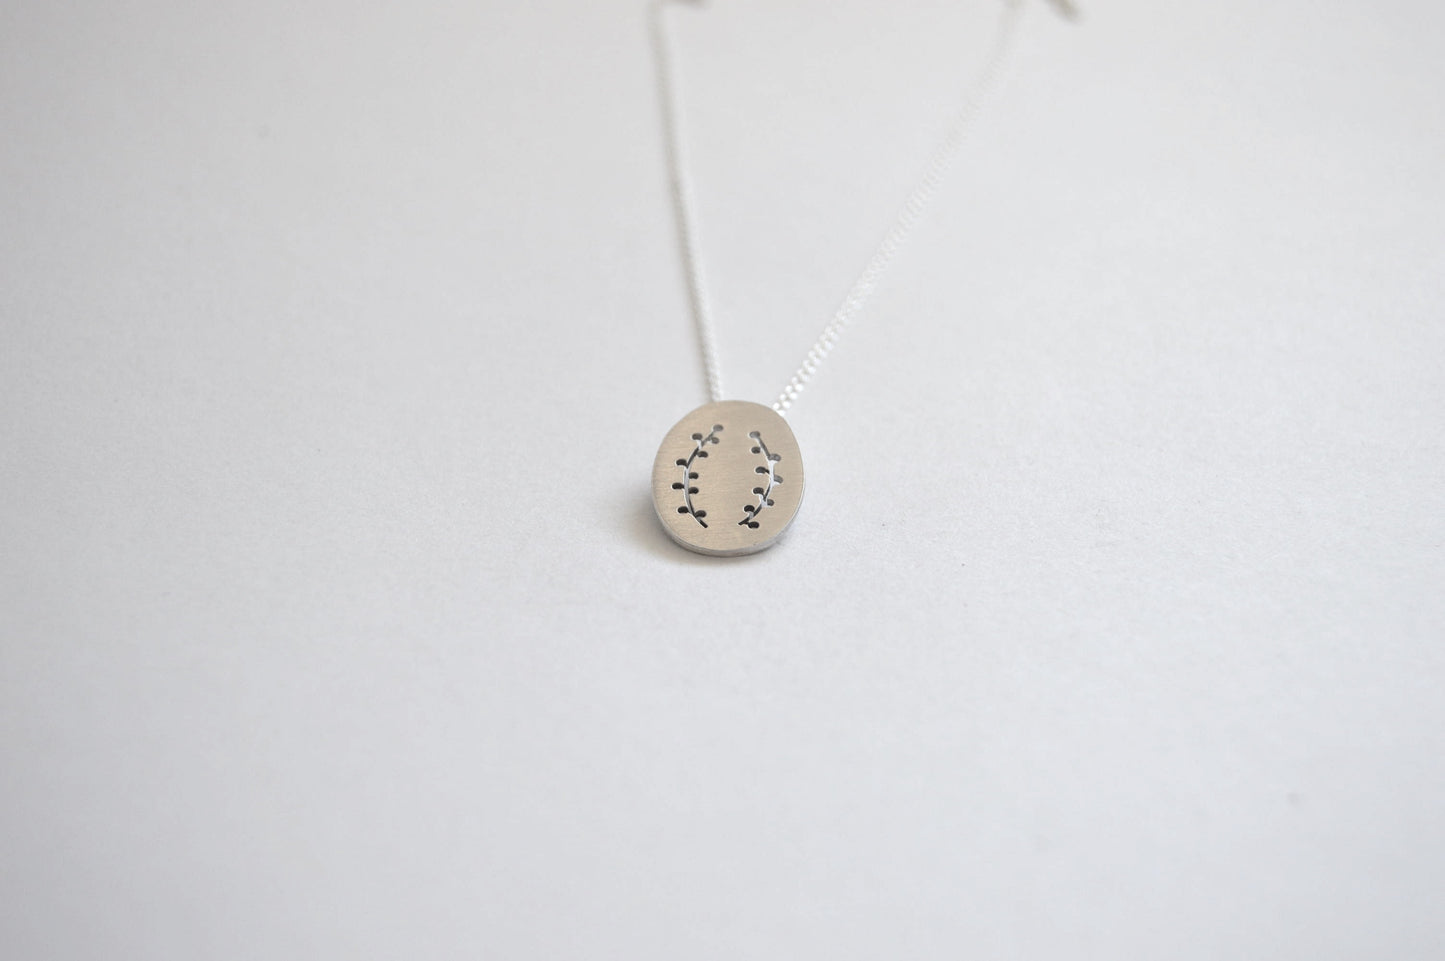  Botanical Collection Oval Pendant with Botanical cut-out inspired by little Sprigs